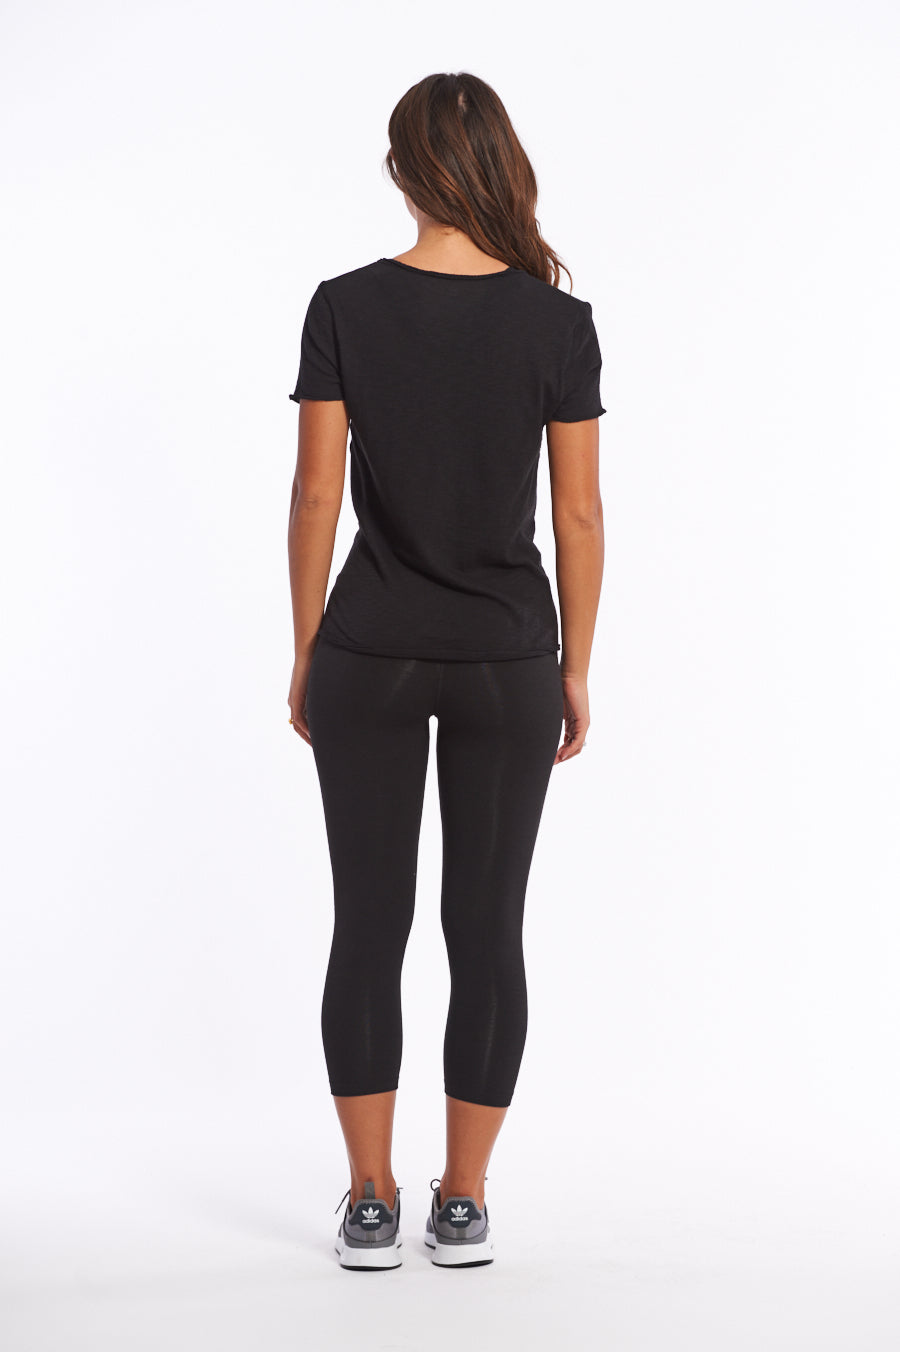 What to wear to yoga organic cotton top